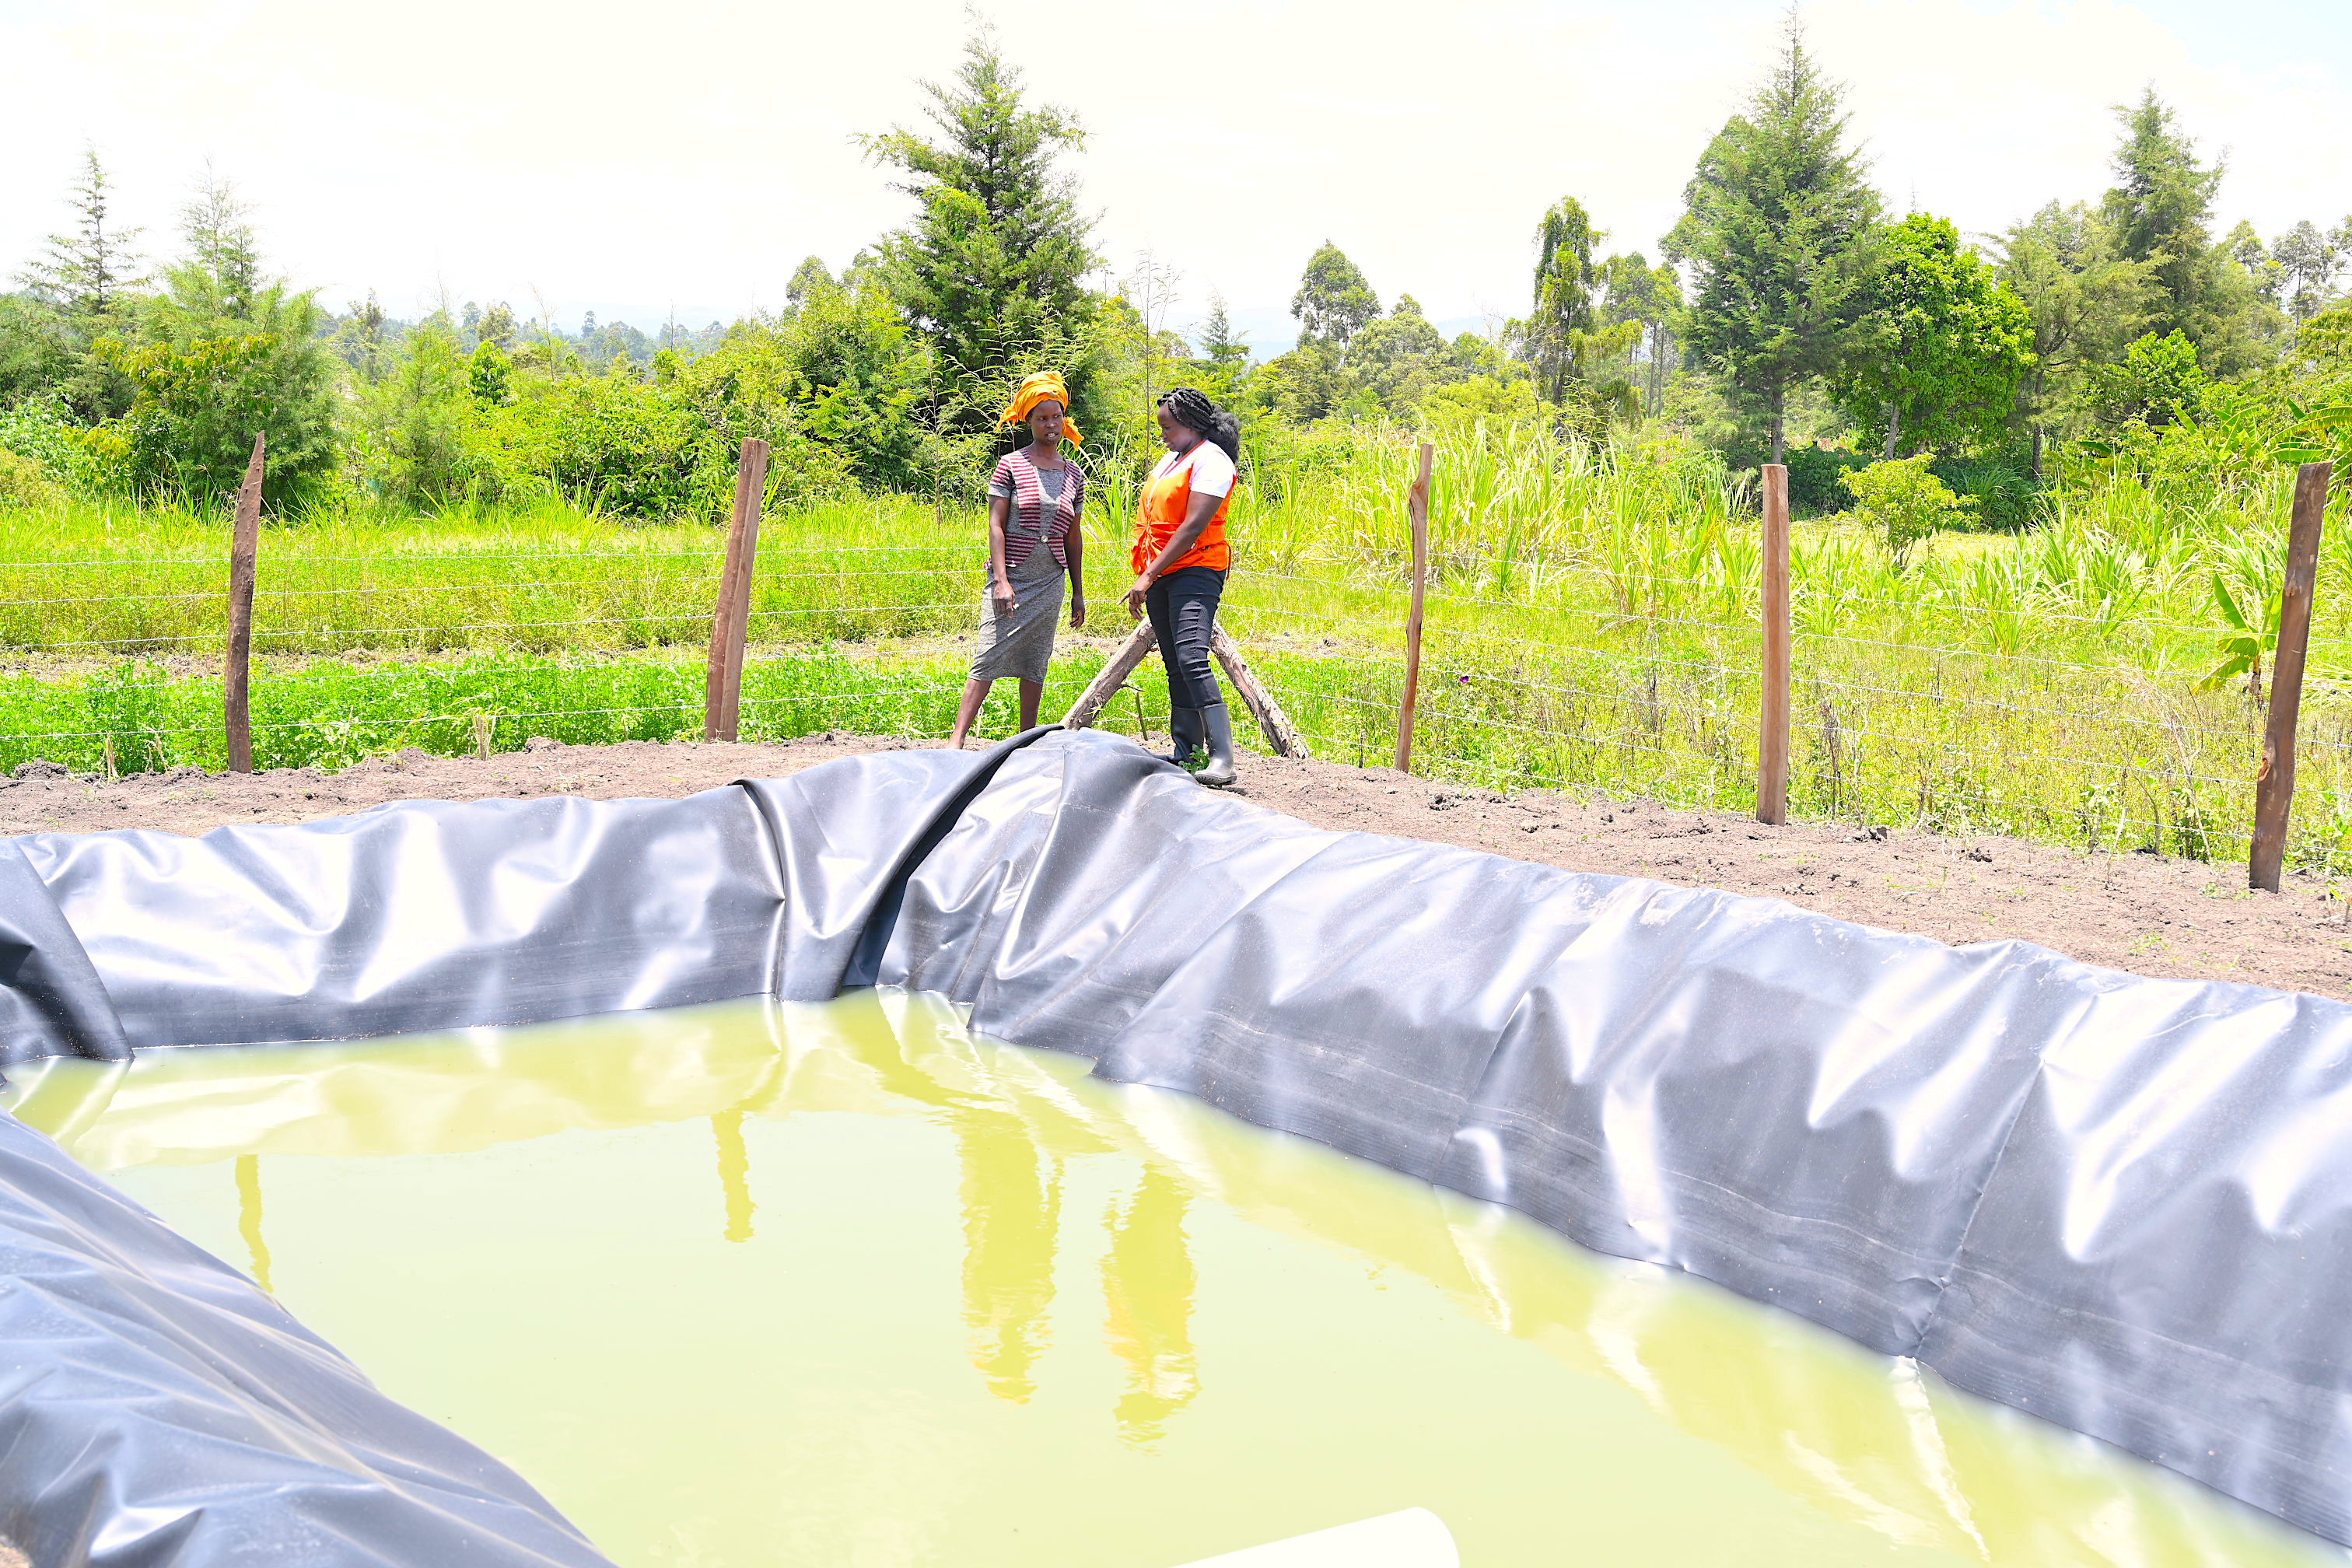 Beatrice benefitted from a dam liner provided by World Vision to improve to access to water for her produce